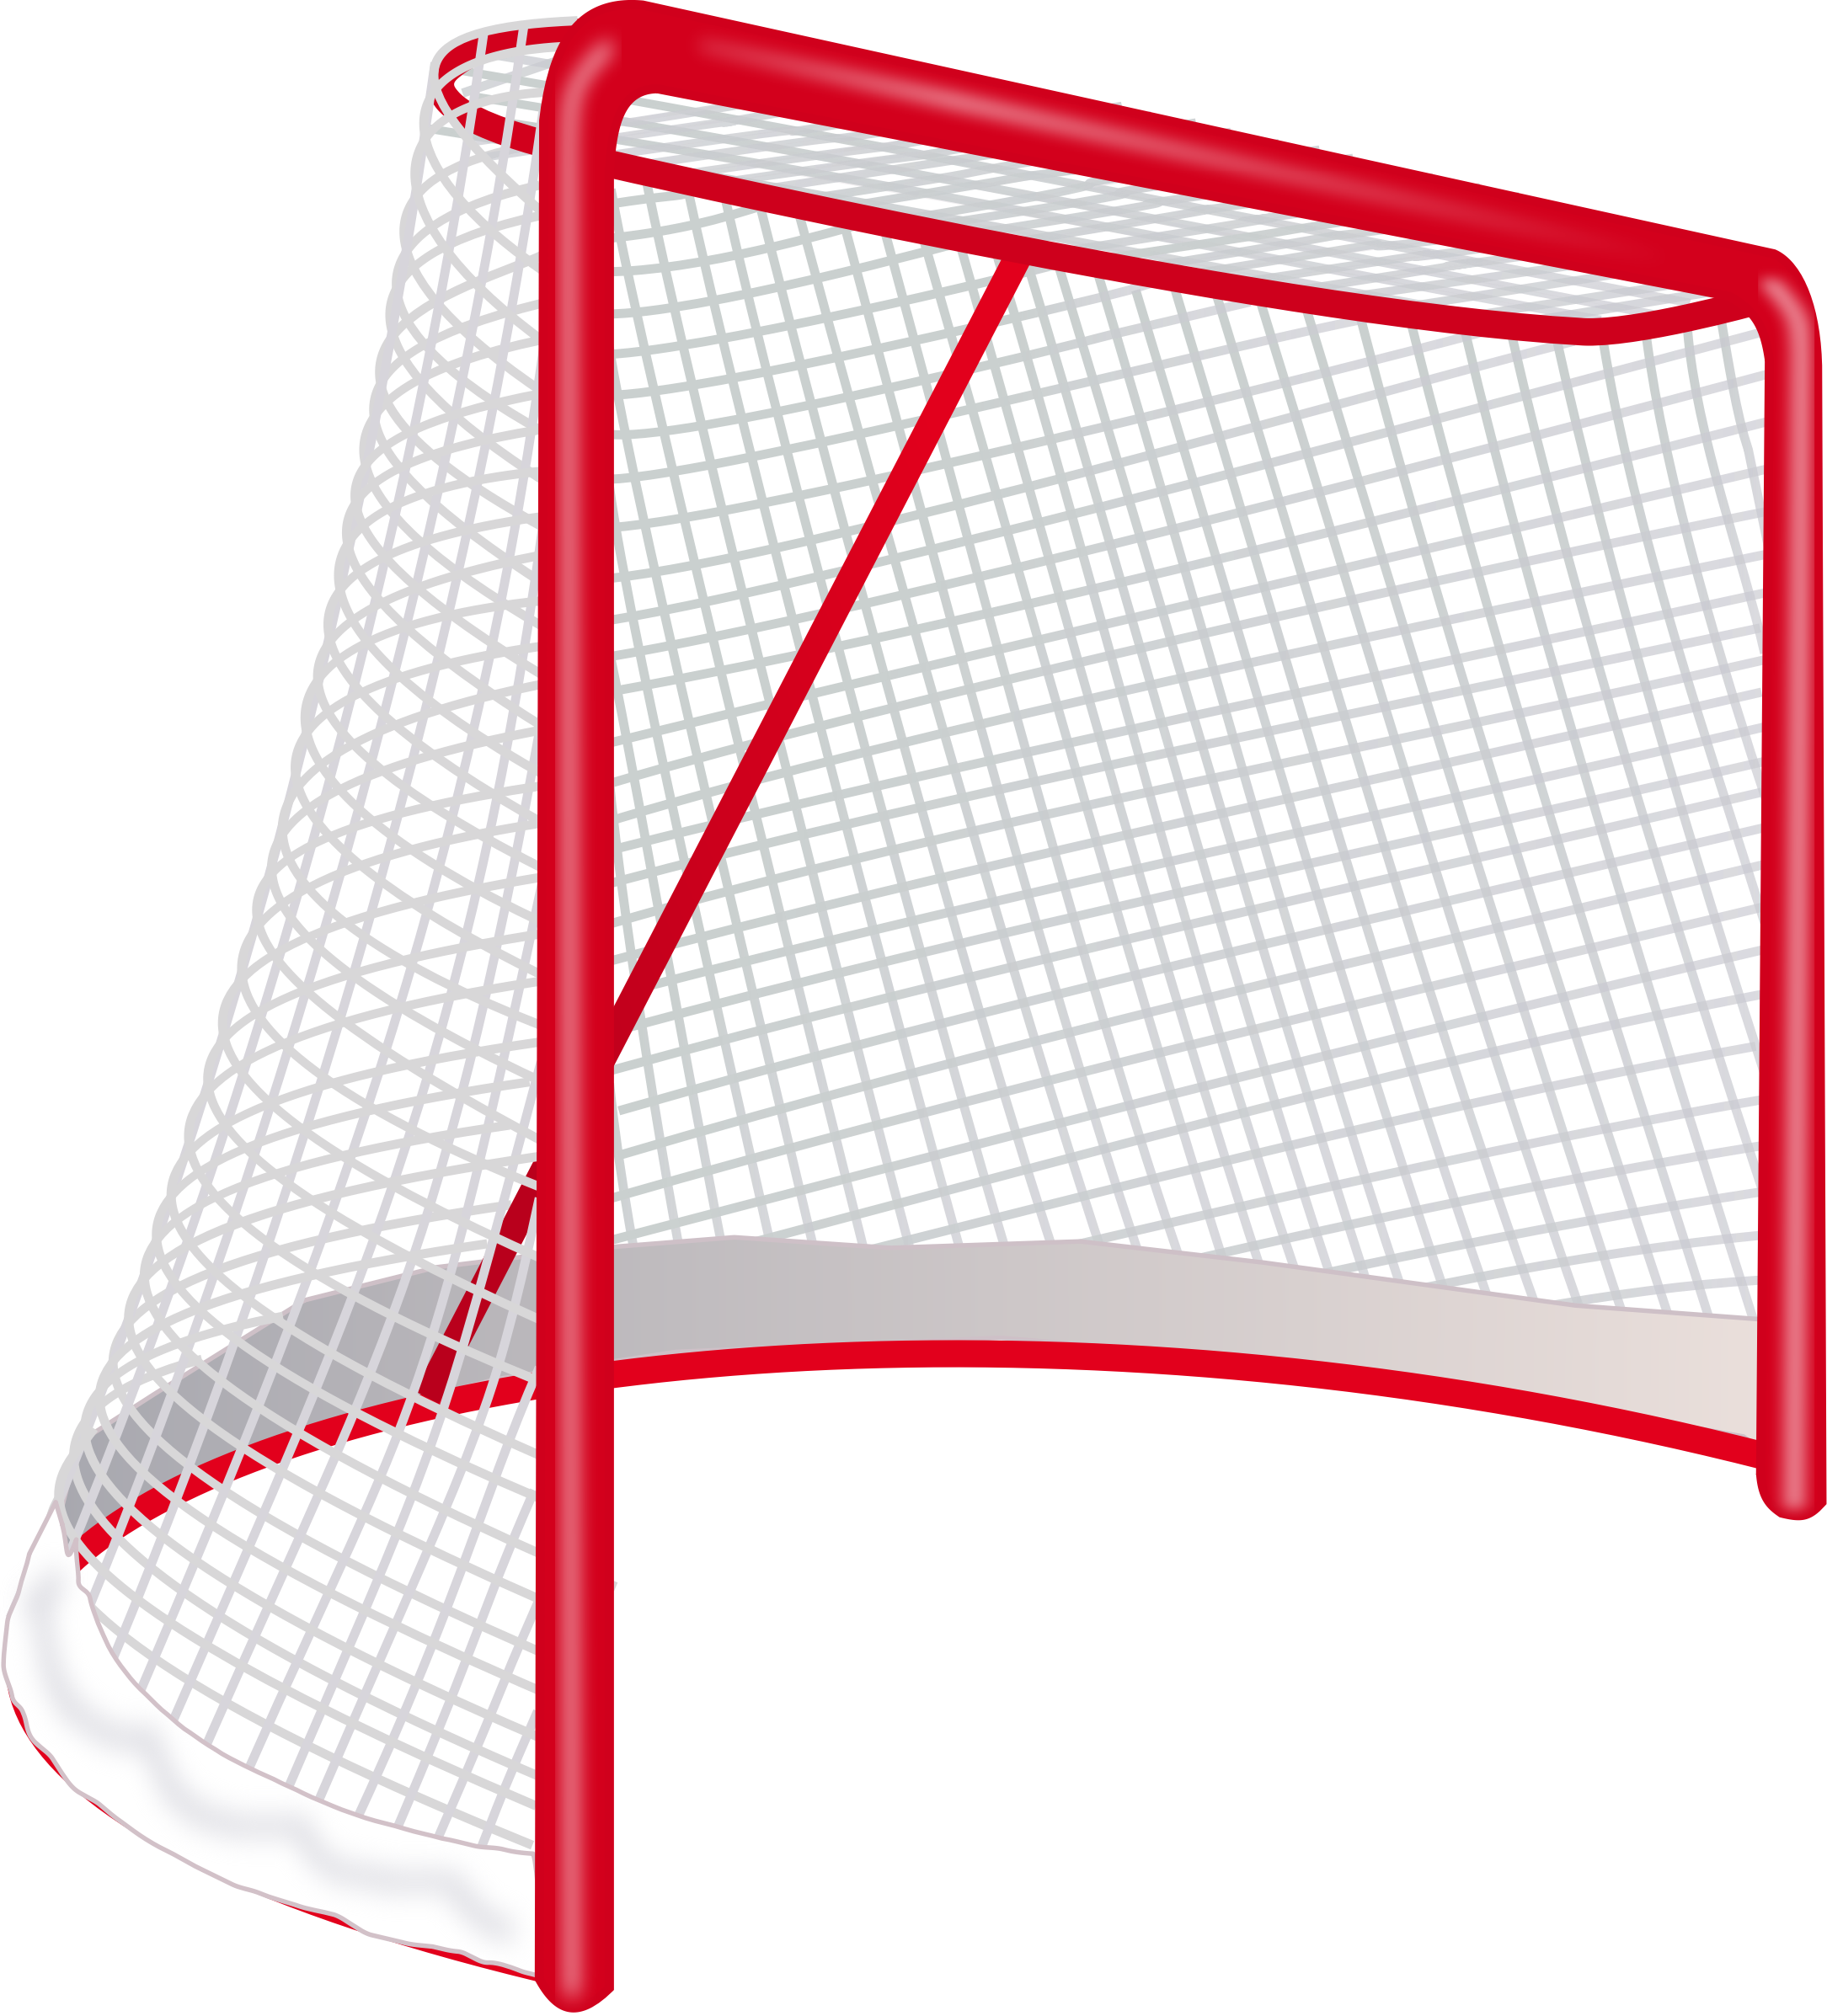 Goal Png Image - Hockey Net Clipart Free.